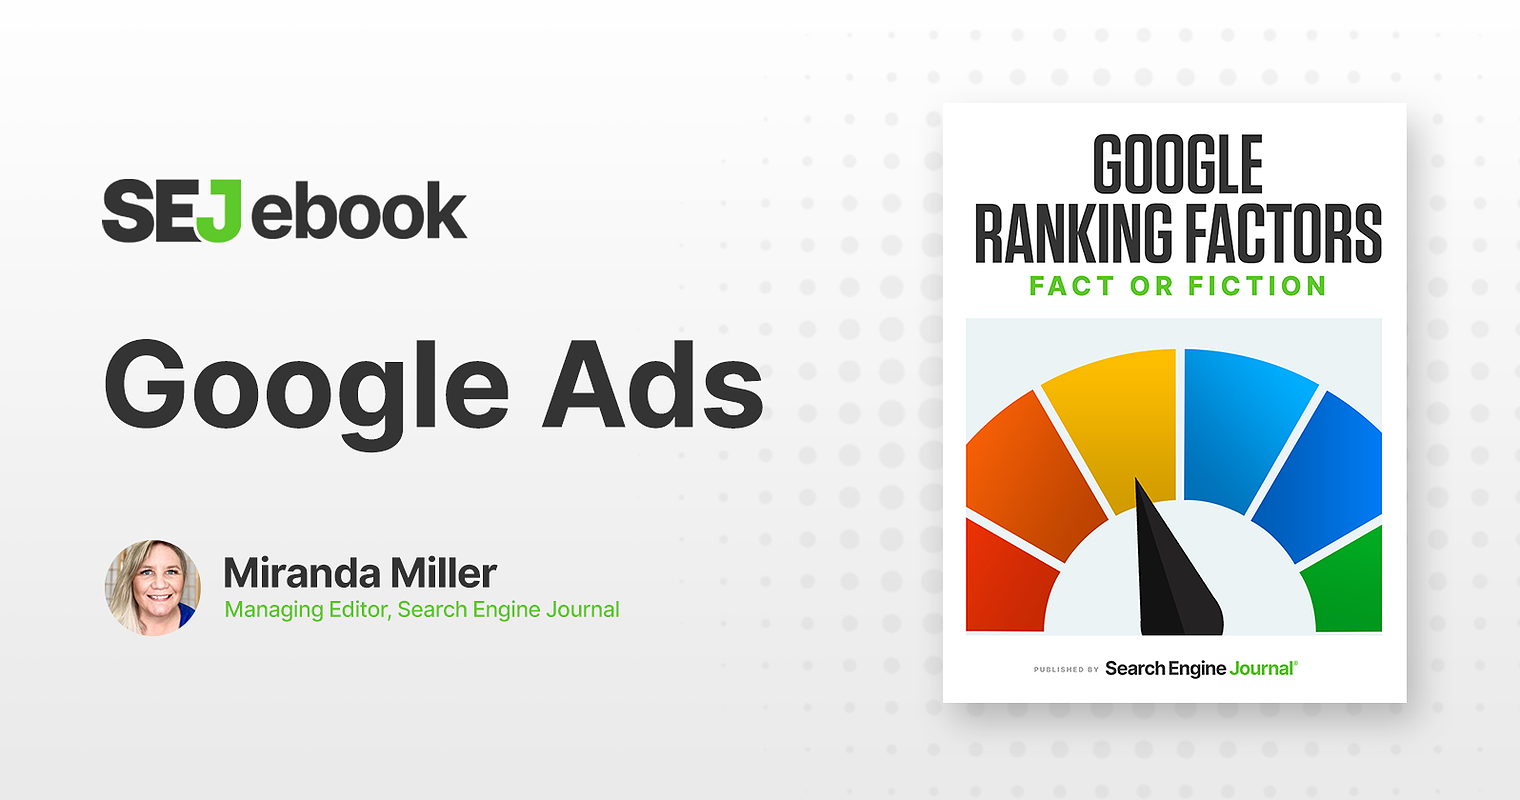 Is Your Usage Of Google Ads An Organic Search Ranking Factor?